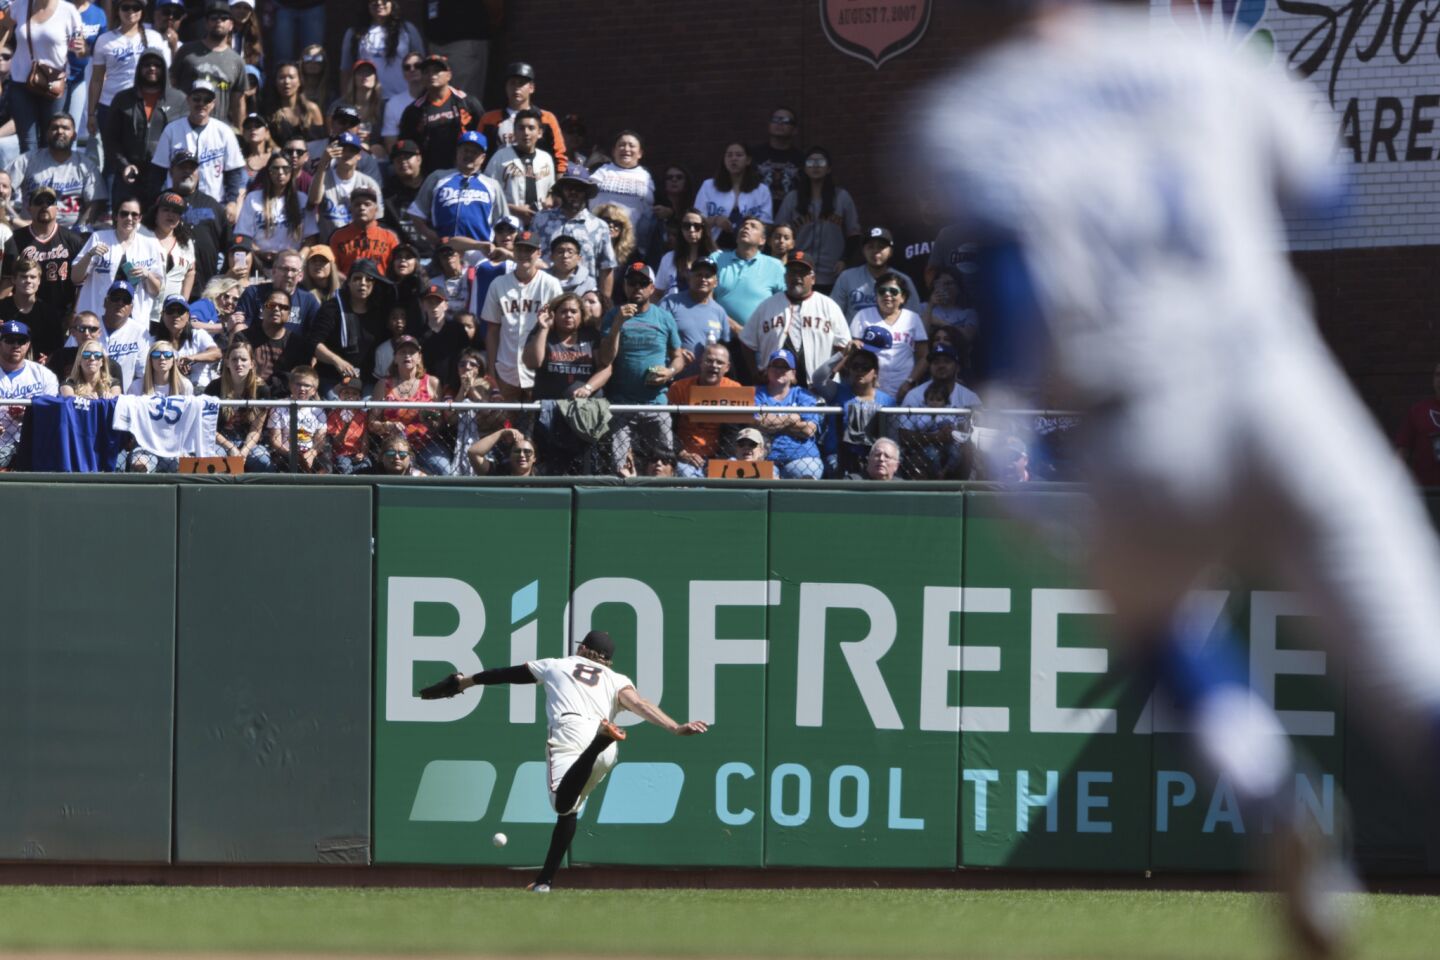 San Francisco Giants right fielder Hunter Pence fails to catch a deep fly ball off the bat of Los Angeles Dodgers batter Enrique Hernandez, not shown, in the fifth inning of a baseball game in San Francisco, Sunday, Sept. 30, 2018.